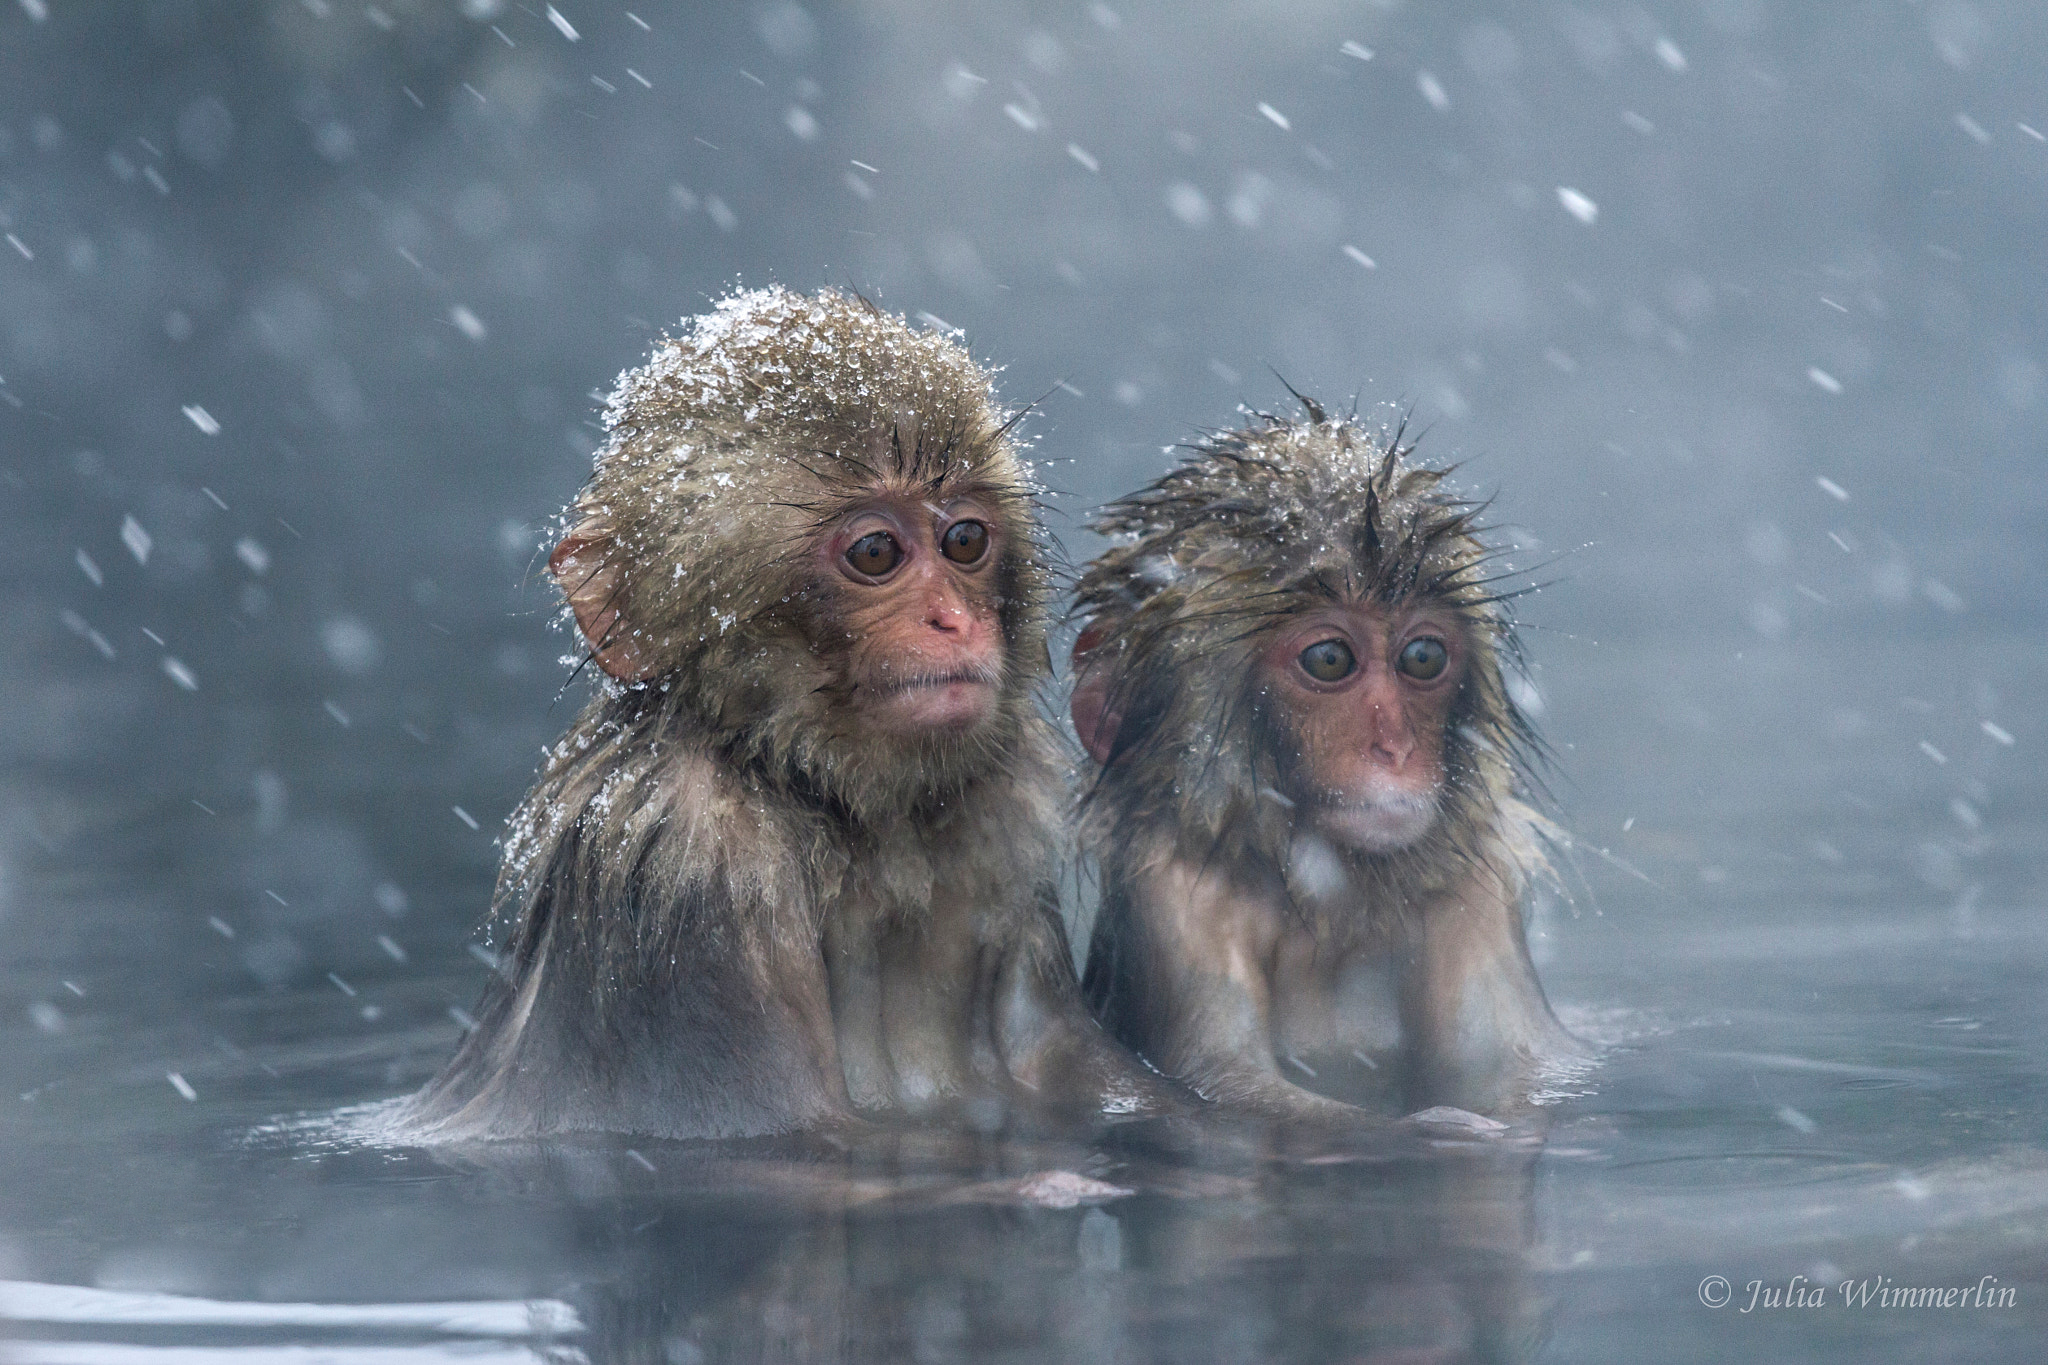 Japanese Macaques in Snowstorm